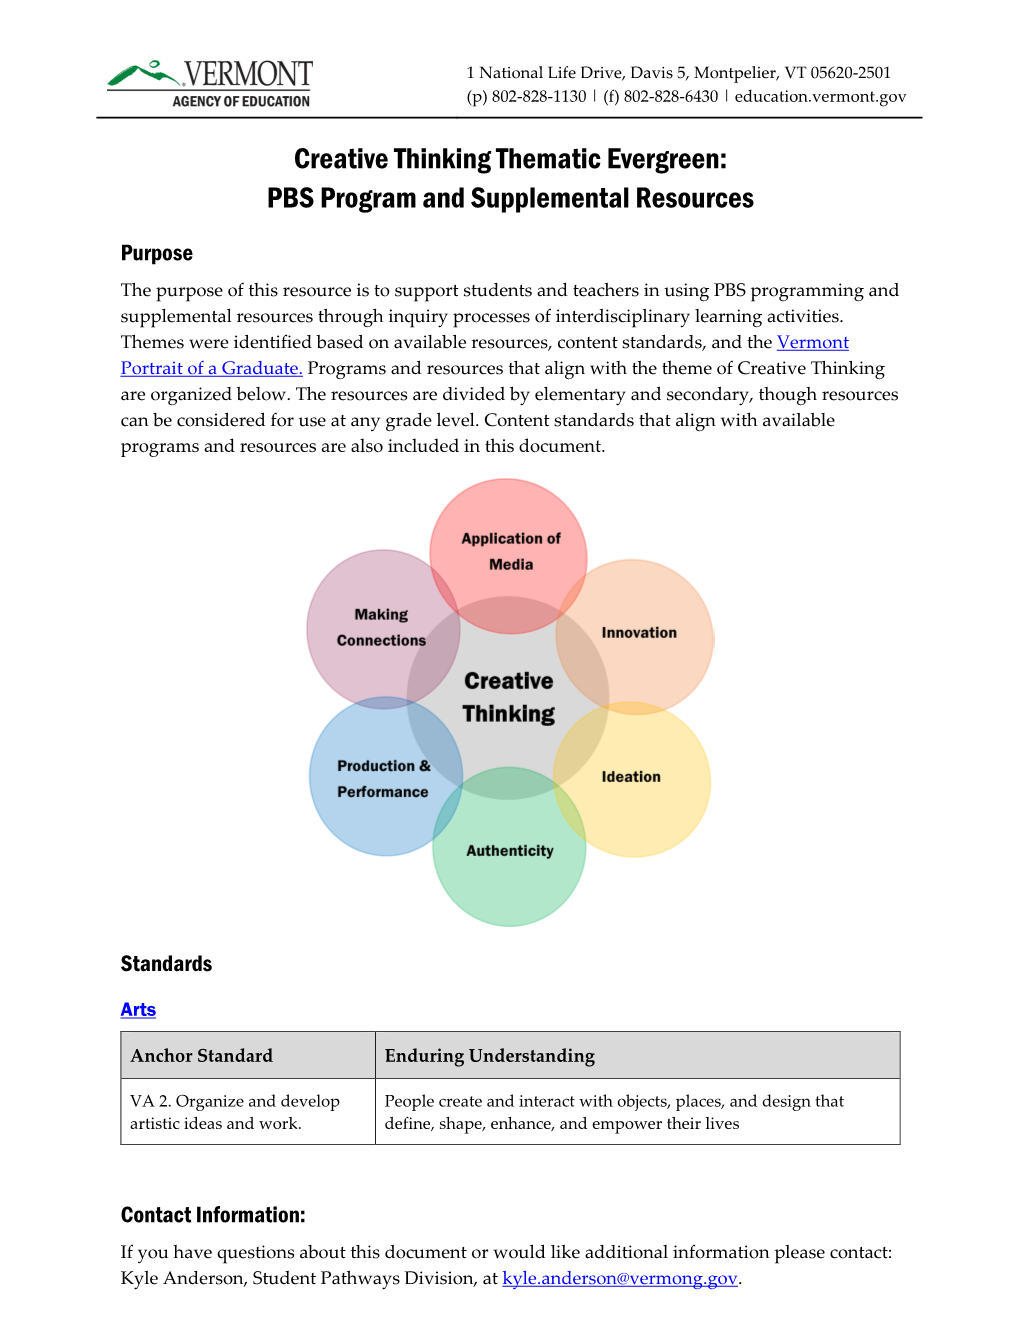 Creative Thinking Thematic Evergreen: PBS Program and Supplemental Resources